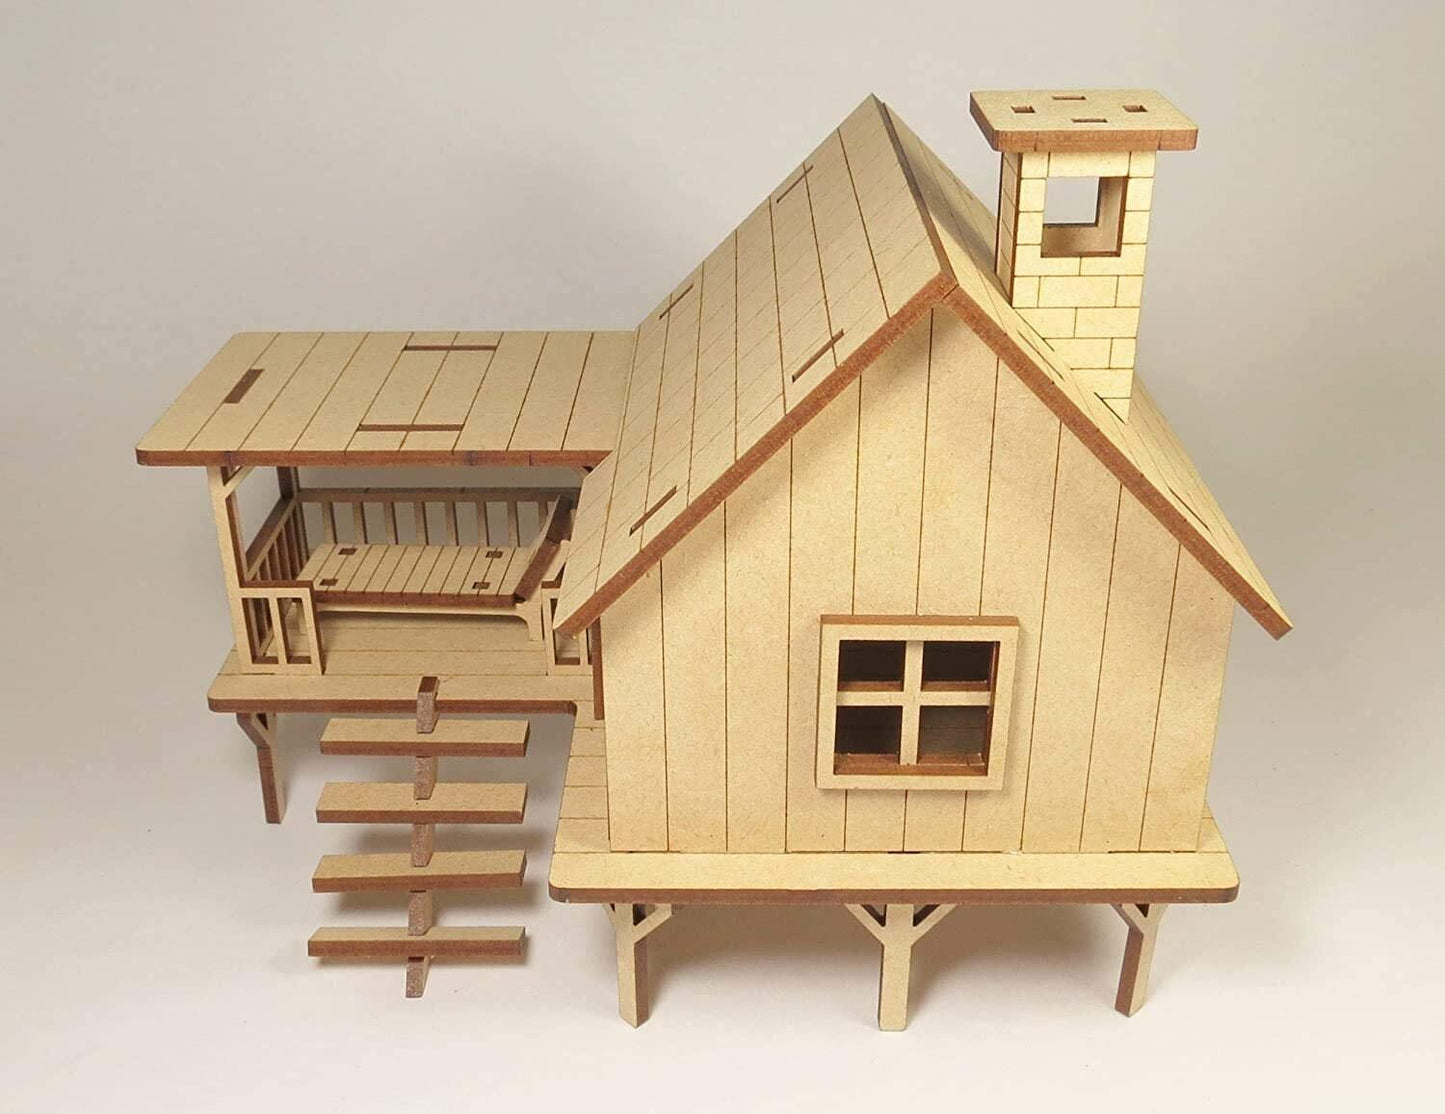 DIY Wooden Doll House Kit - DIY Beach House Miniature - Farm House - 3D Wooden Puzzle - Construction Toy, Modeling Kit - Easy to Assemble